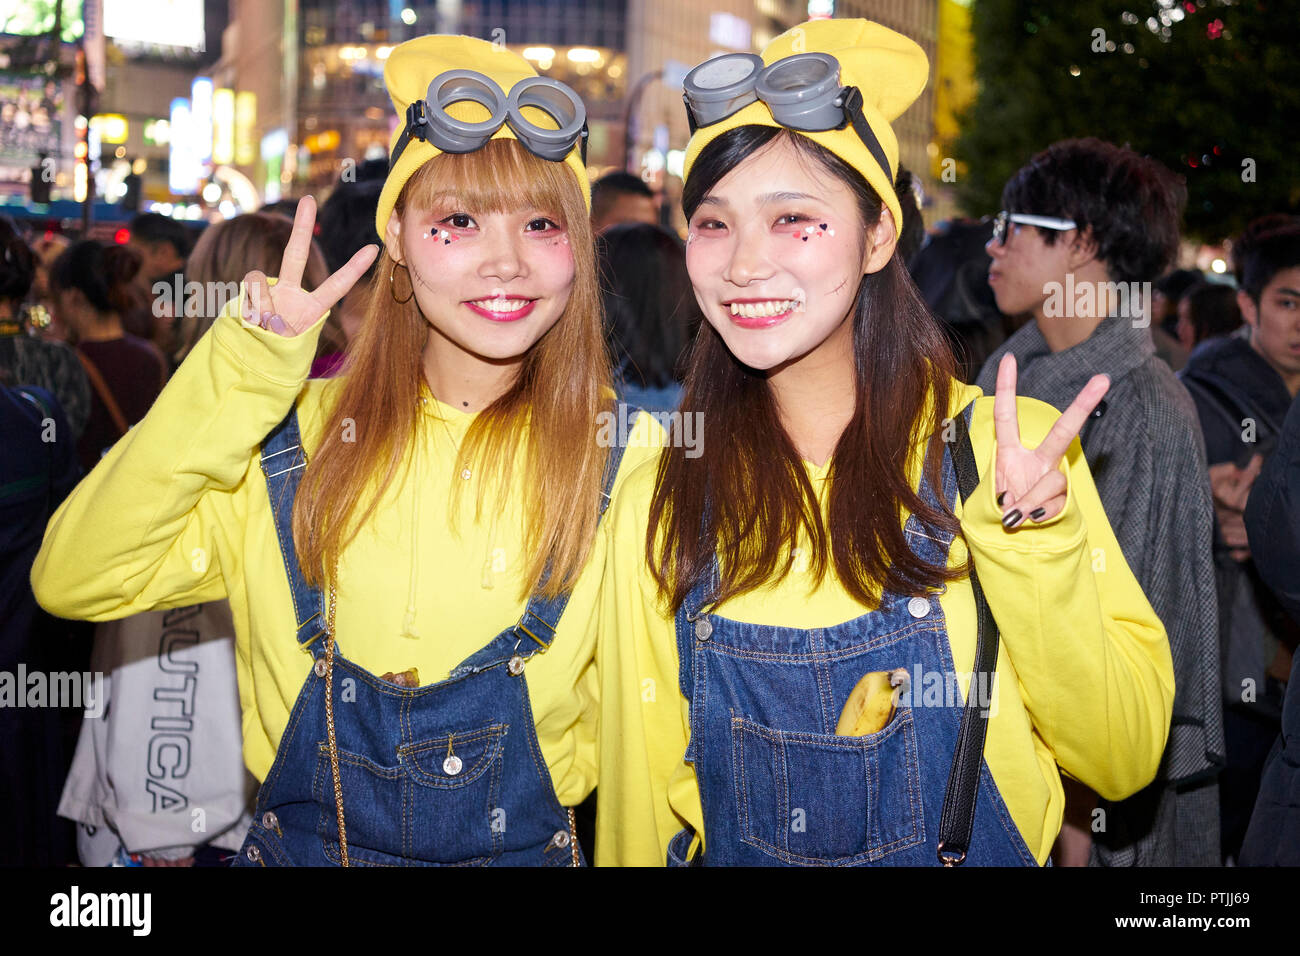 Young Japanese girls dressed as minions at the Halloween celebrations in Shibuya. Stock Photo